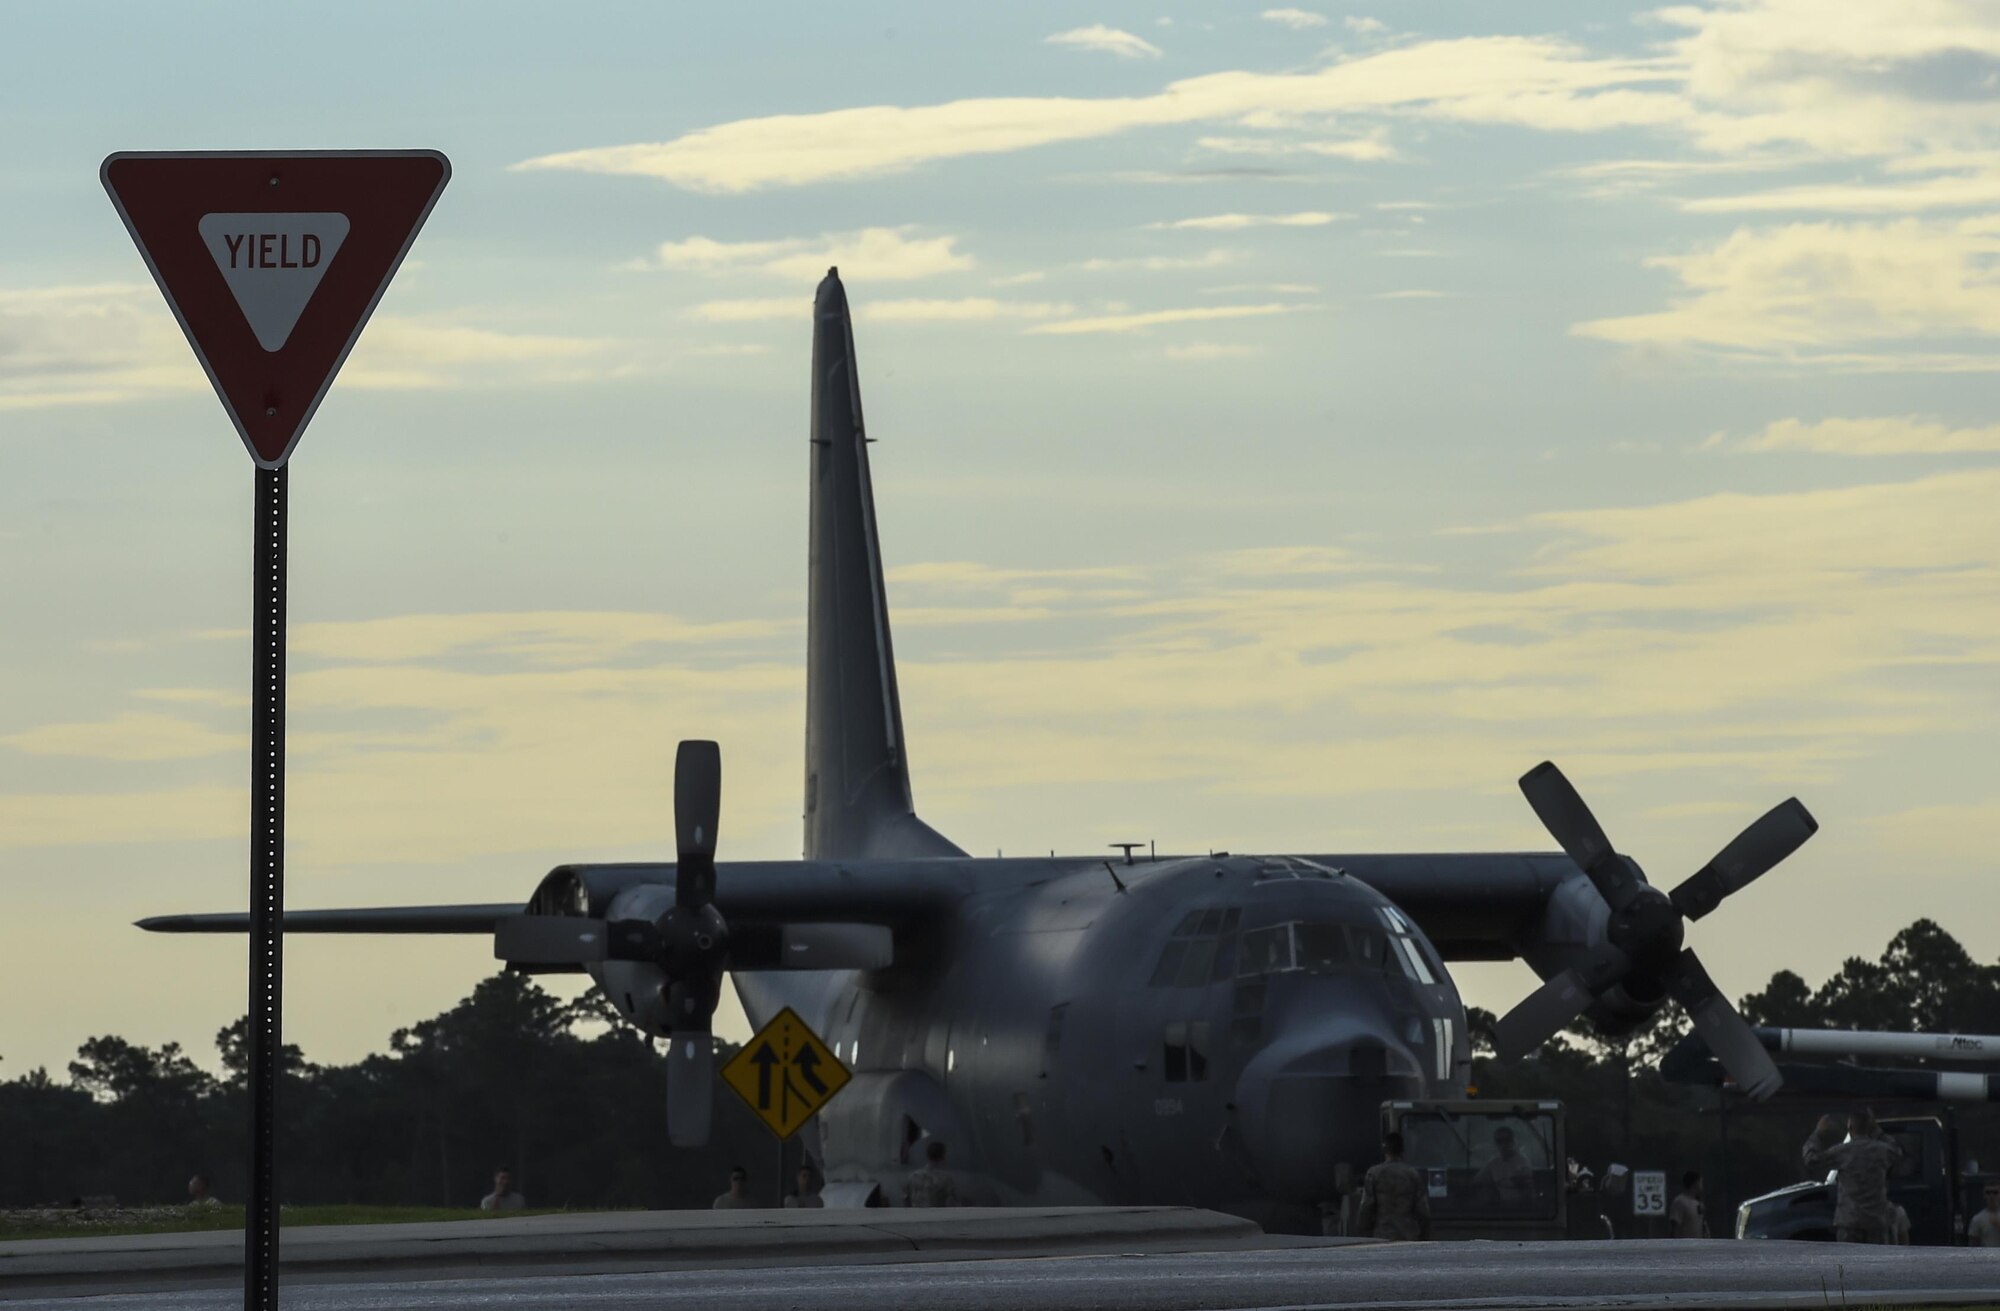 An MC-130P Combat Shadow is towed down Independence Road, Aug. 15, 2015, on Hurlburt Field, Fla. The Combat Shadow was towed from the flightline and staged for installation in the Hurlburt Field Air Park. The MC-130P fleet was retired May 15, 2015, after more than 25 years of service. The installation process for this aircraft known as “Team Shadow,” is scheduled for completion by Sept. 6, 2015. (U.S. Air Force photo by Airman 1st Class Ryan Conroy/Released)
